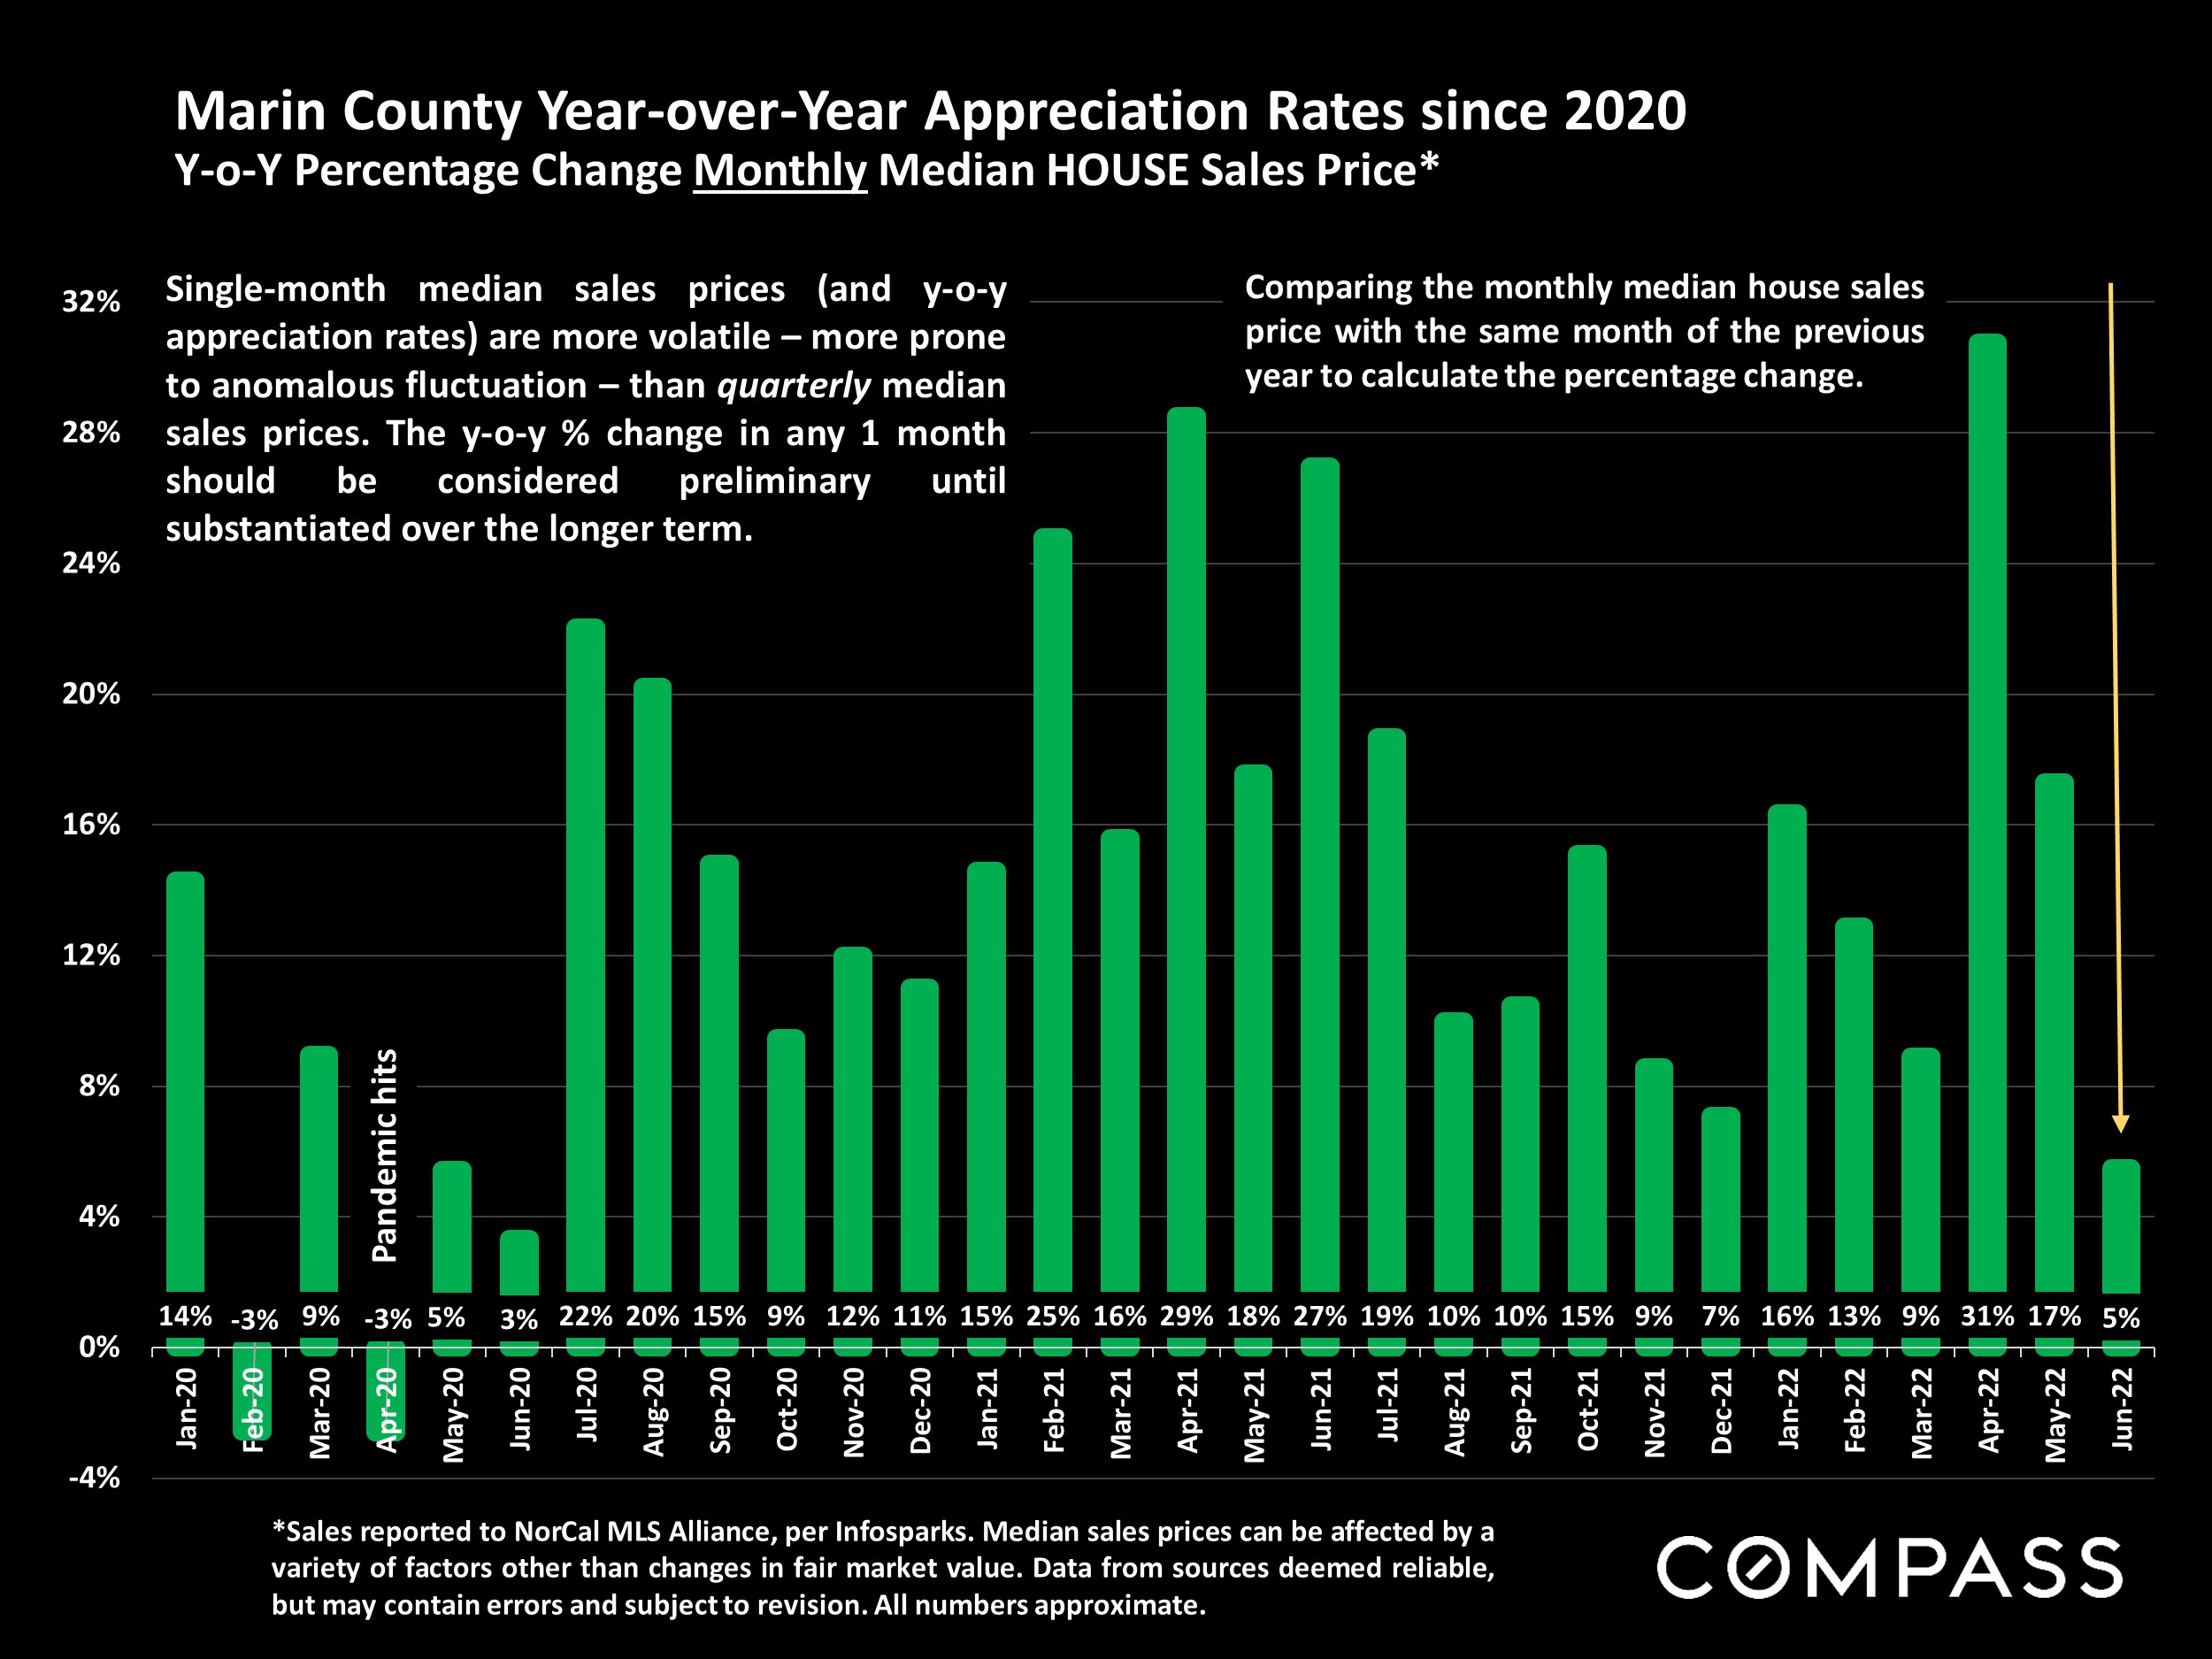 Slide showing Marin County Year-over-Year Appreciation Rates since 2020